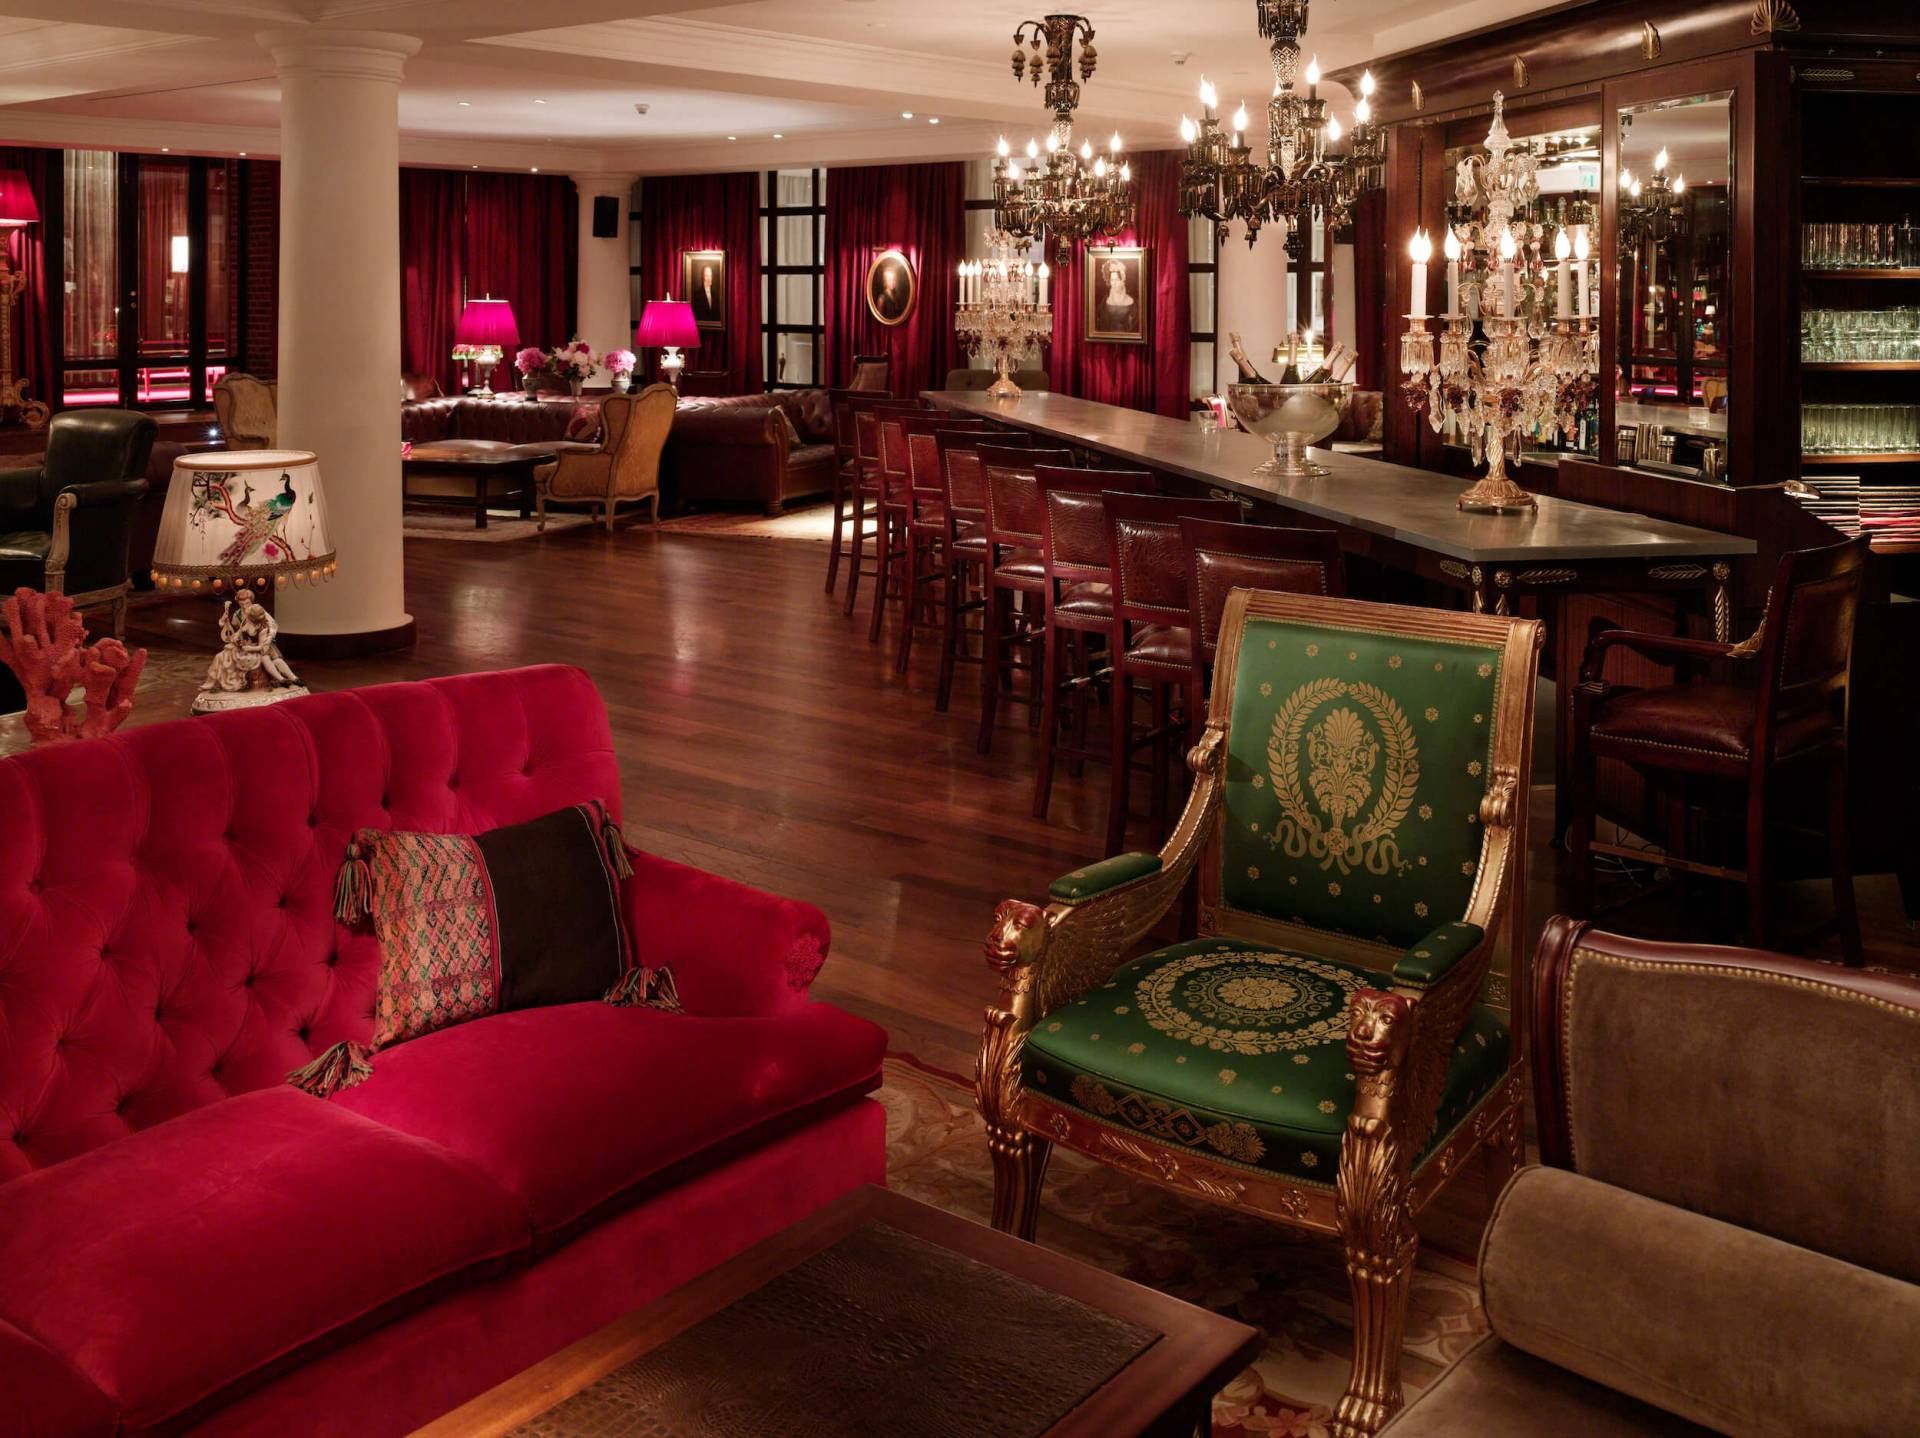 green chair and red couch sit in bar area with red curtains and chandeliers